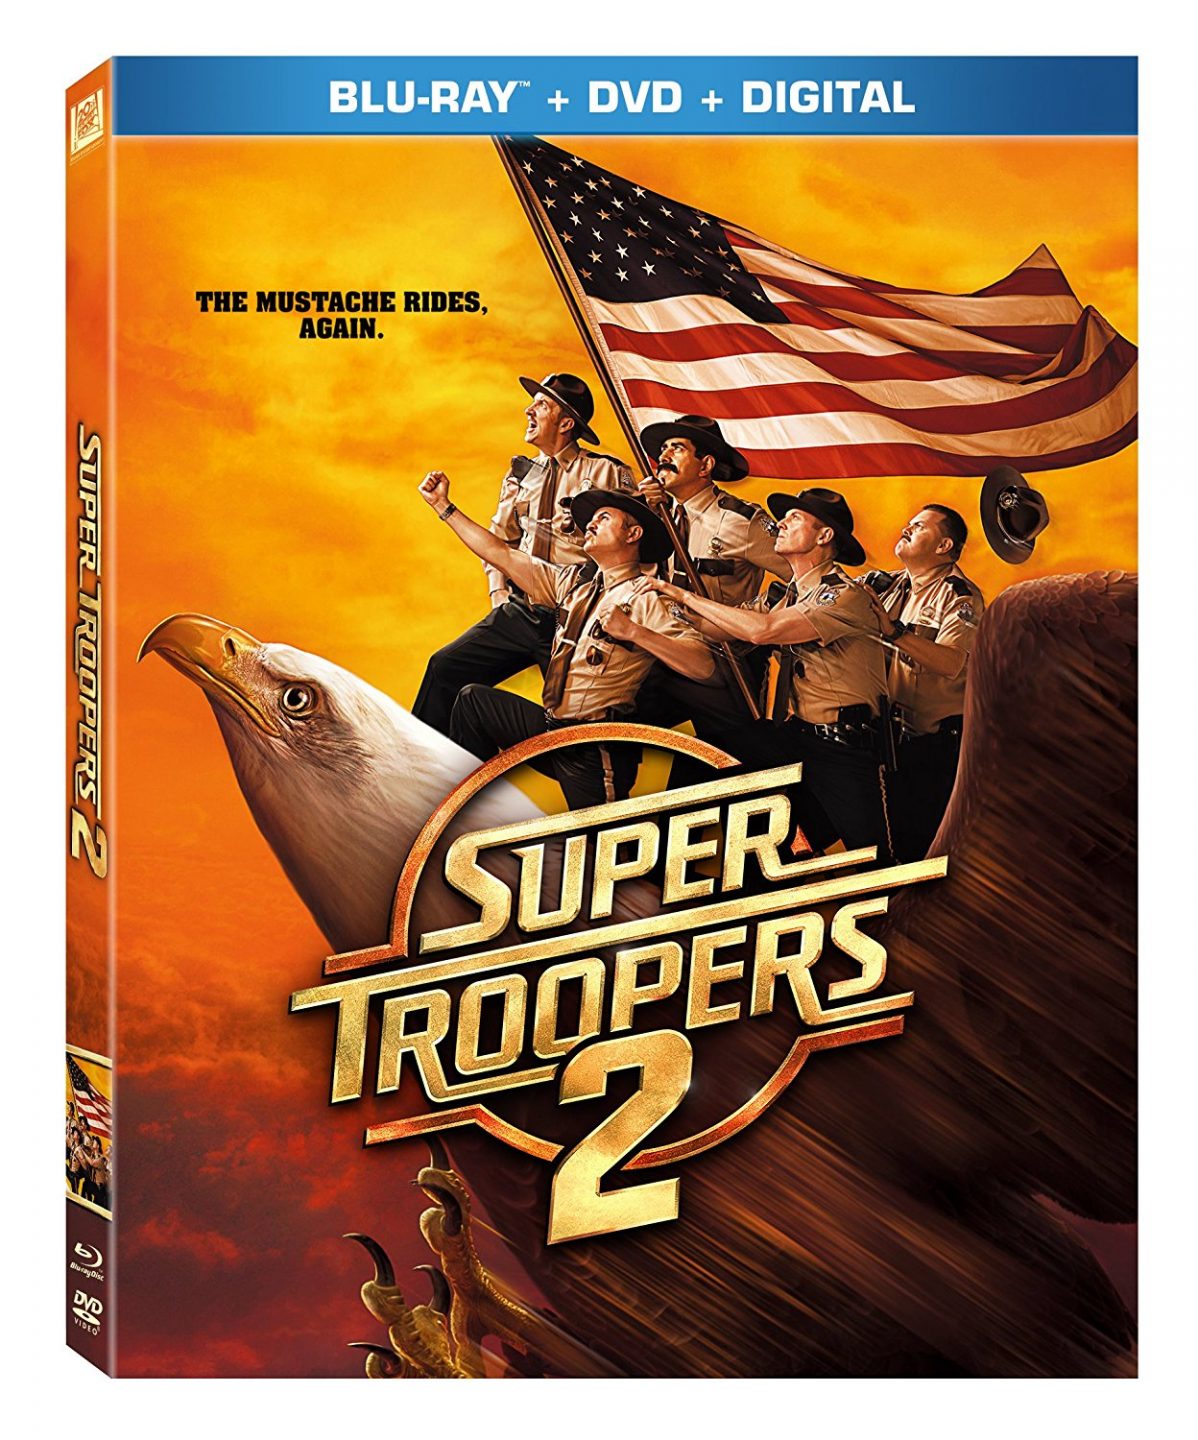 Super Troopers 2 Blu-Ray Combo Pack cover (20th Century Fox Home Entertainment)